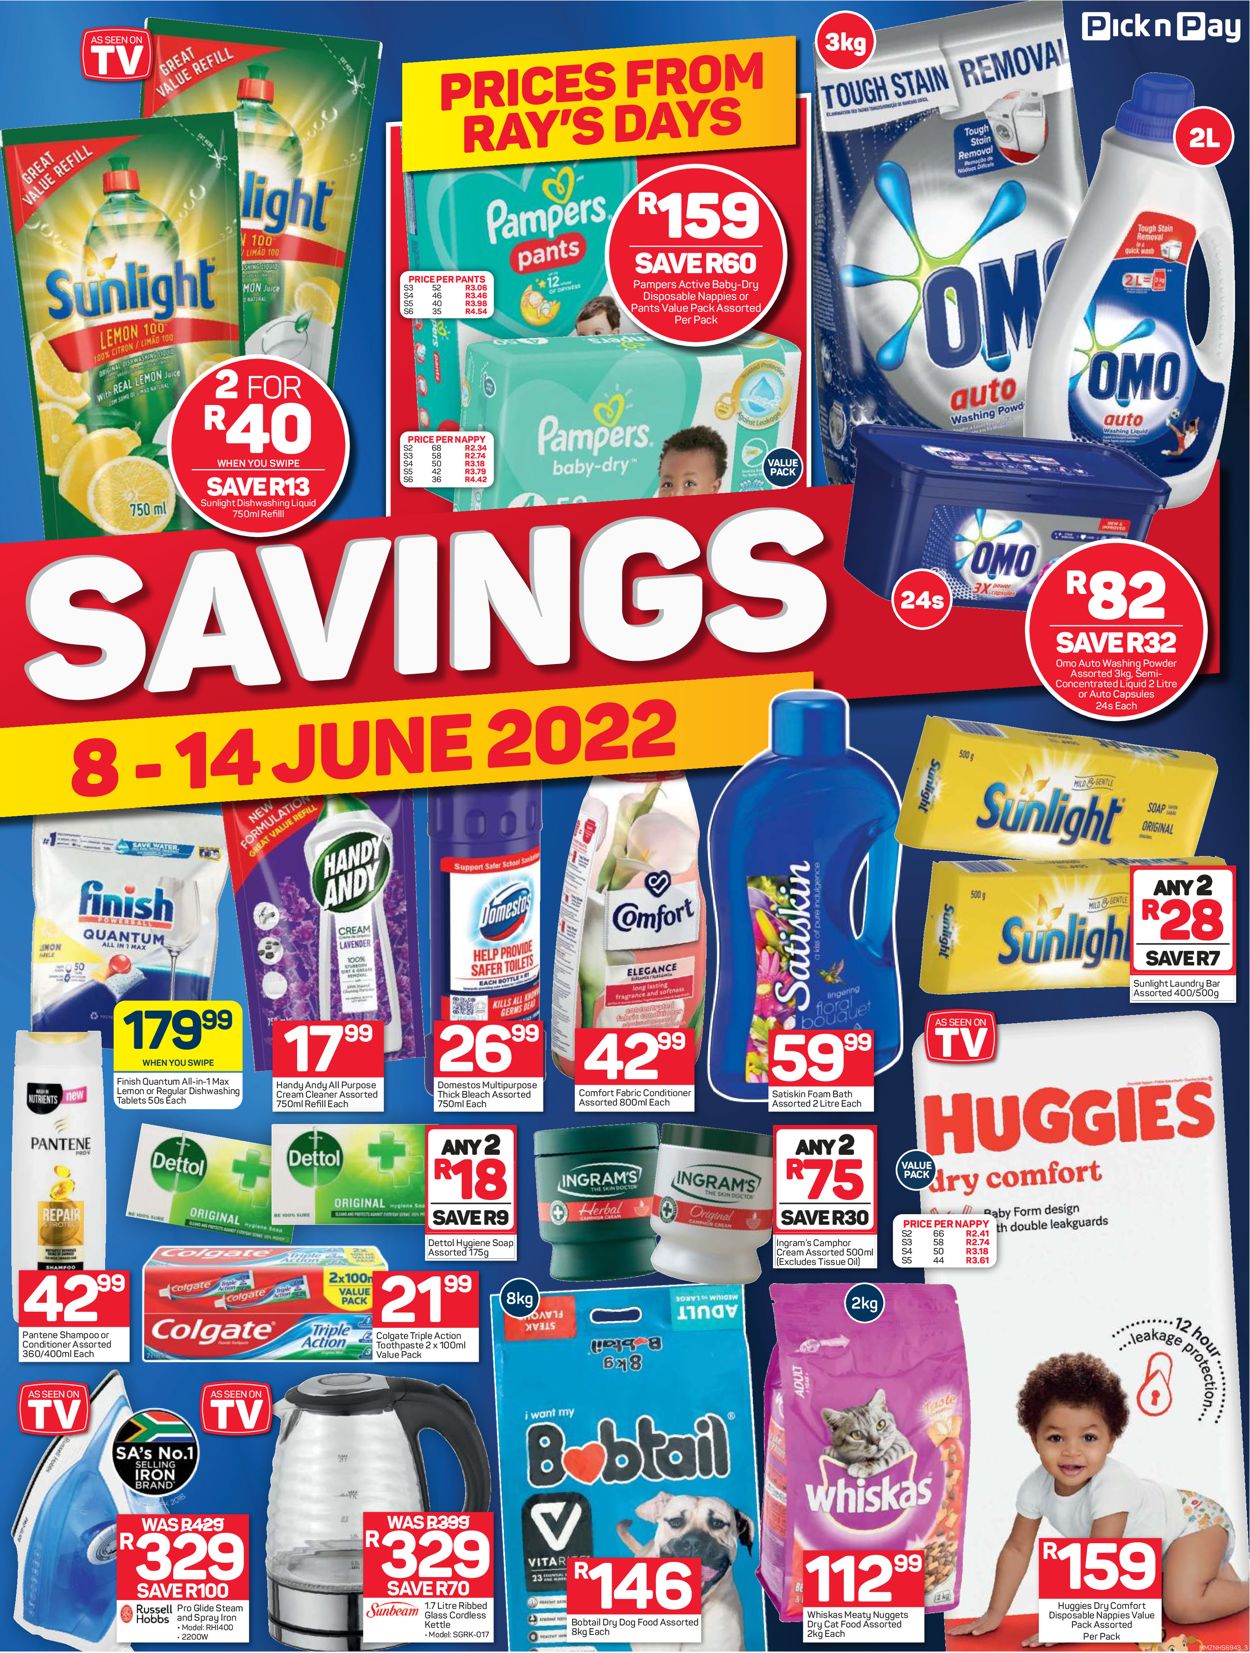 Pick n Pay Catalogue - 2022/06/08-2022/06/19 (Page 4)